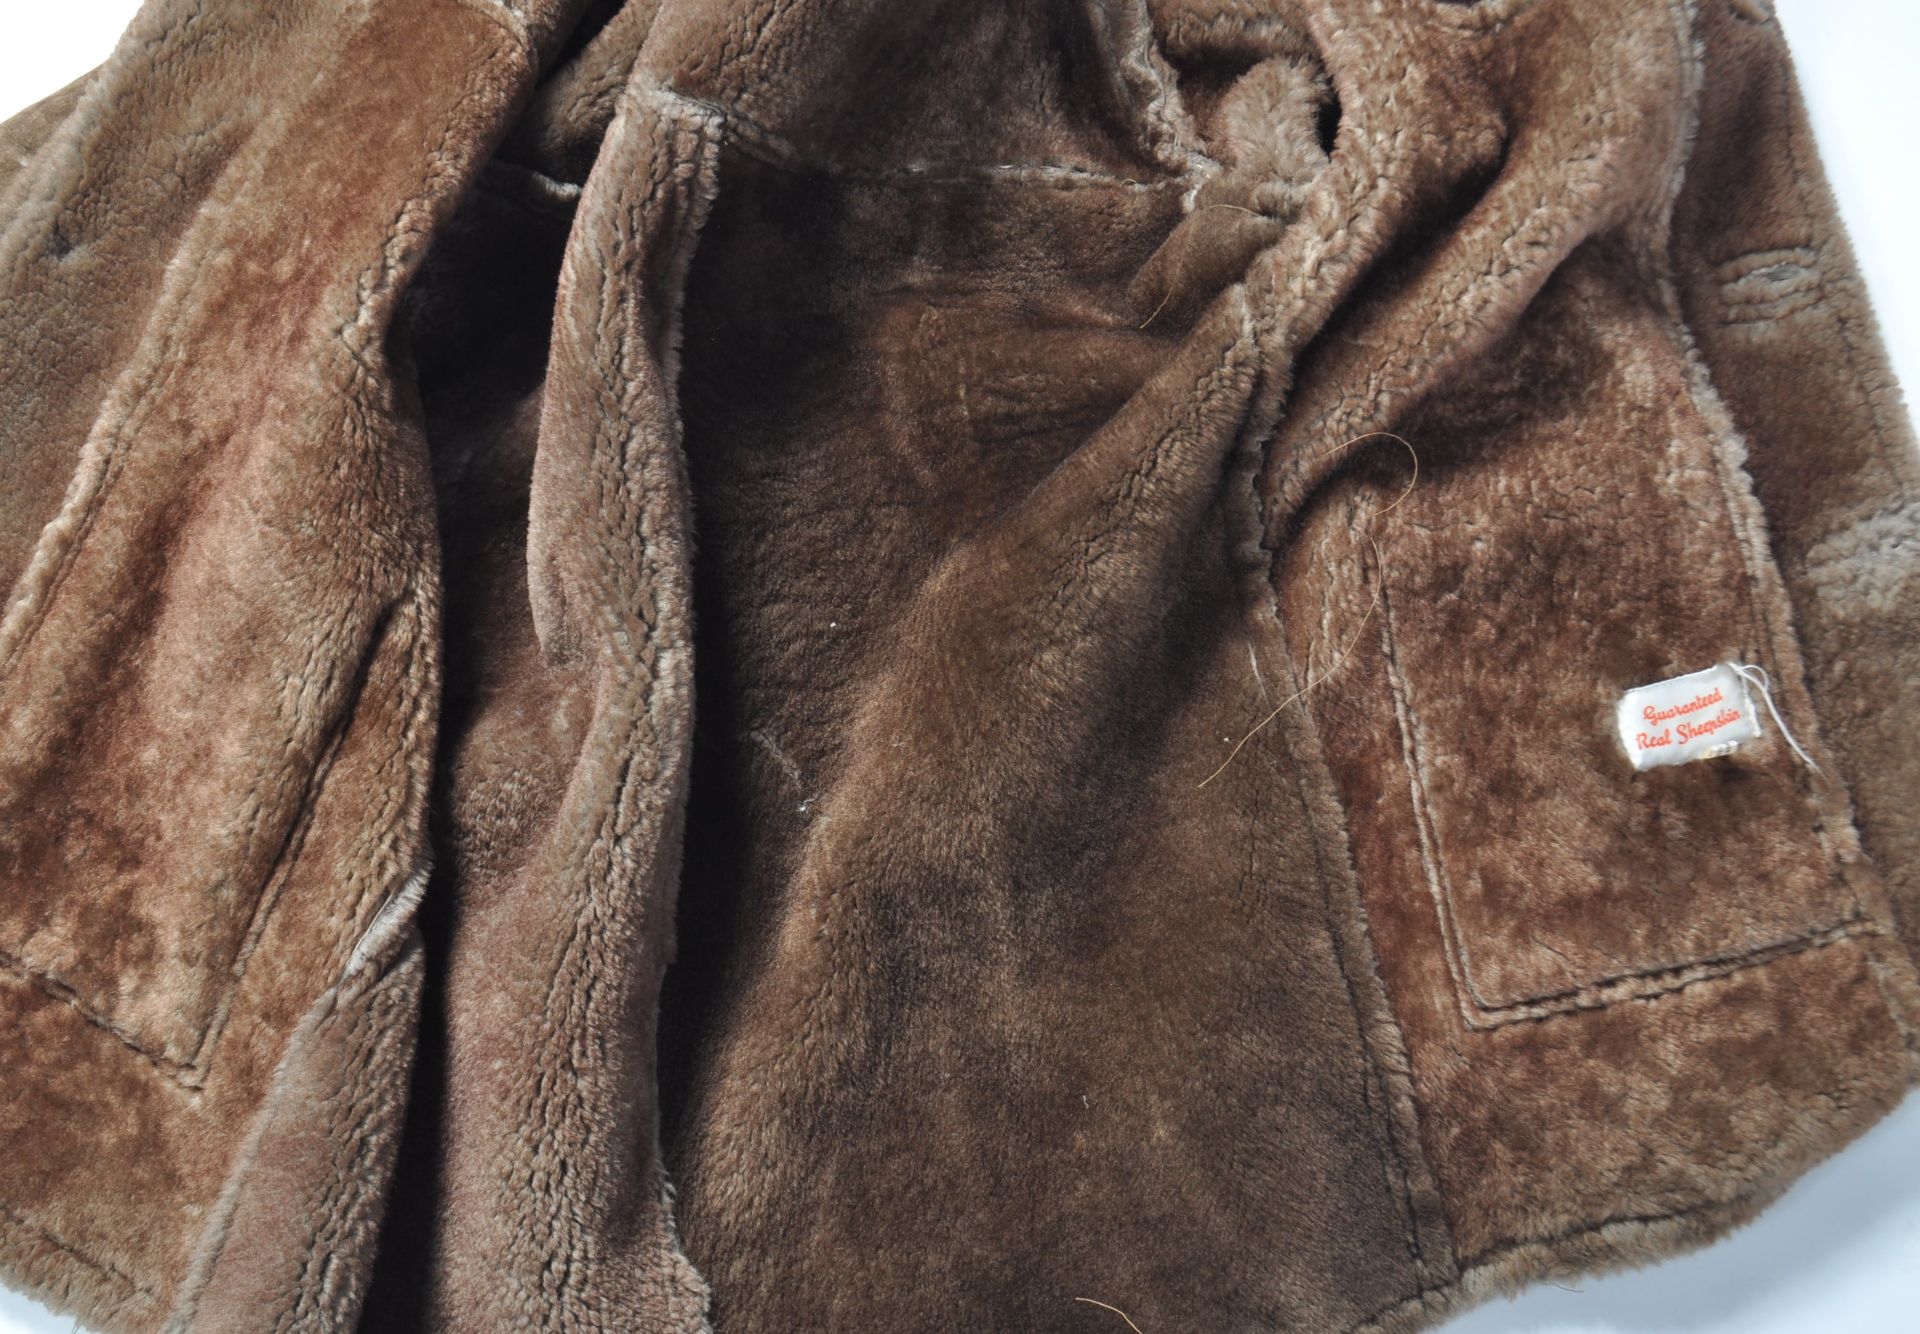 ESTATE OF DAVE PROWSE - 1970S SHEEPSKIN COAT AS WORN BY MR PROWSE - Image 6 of 7